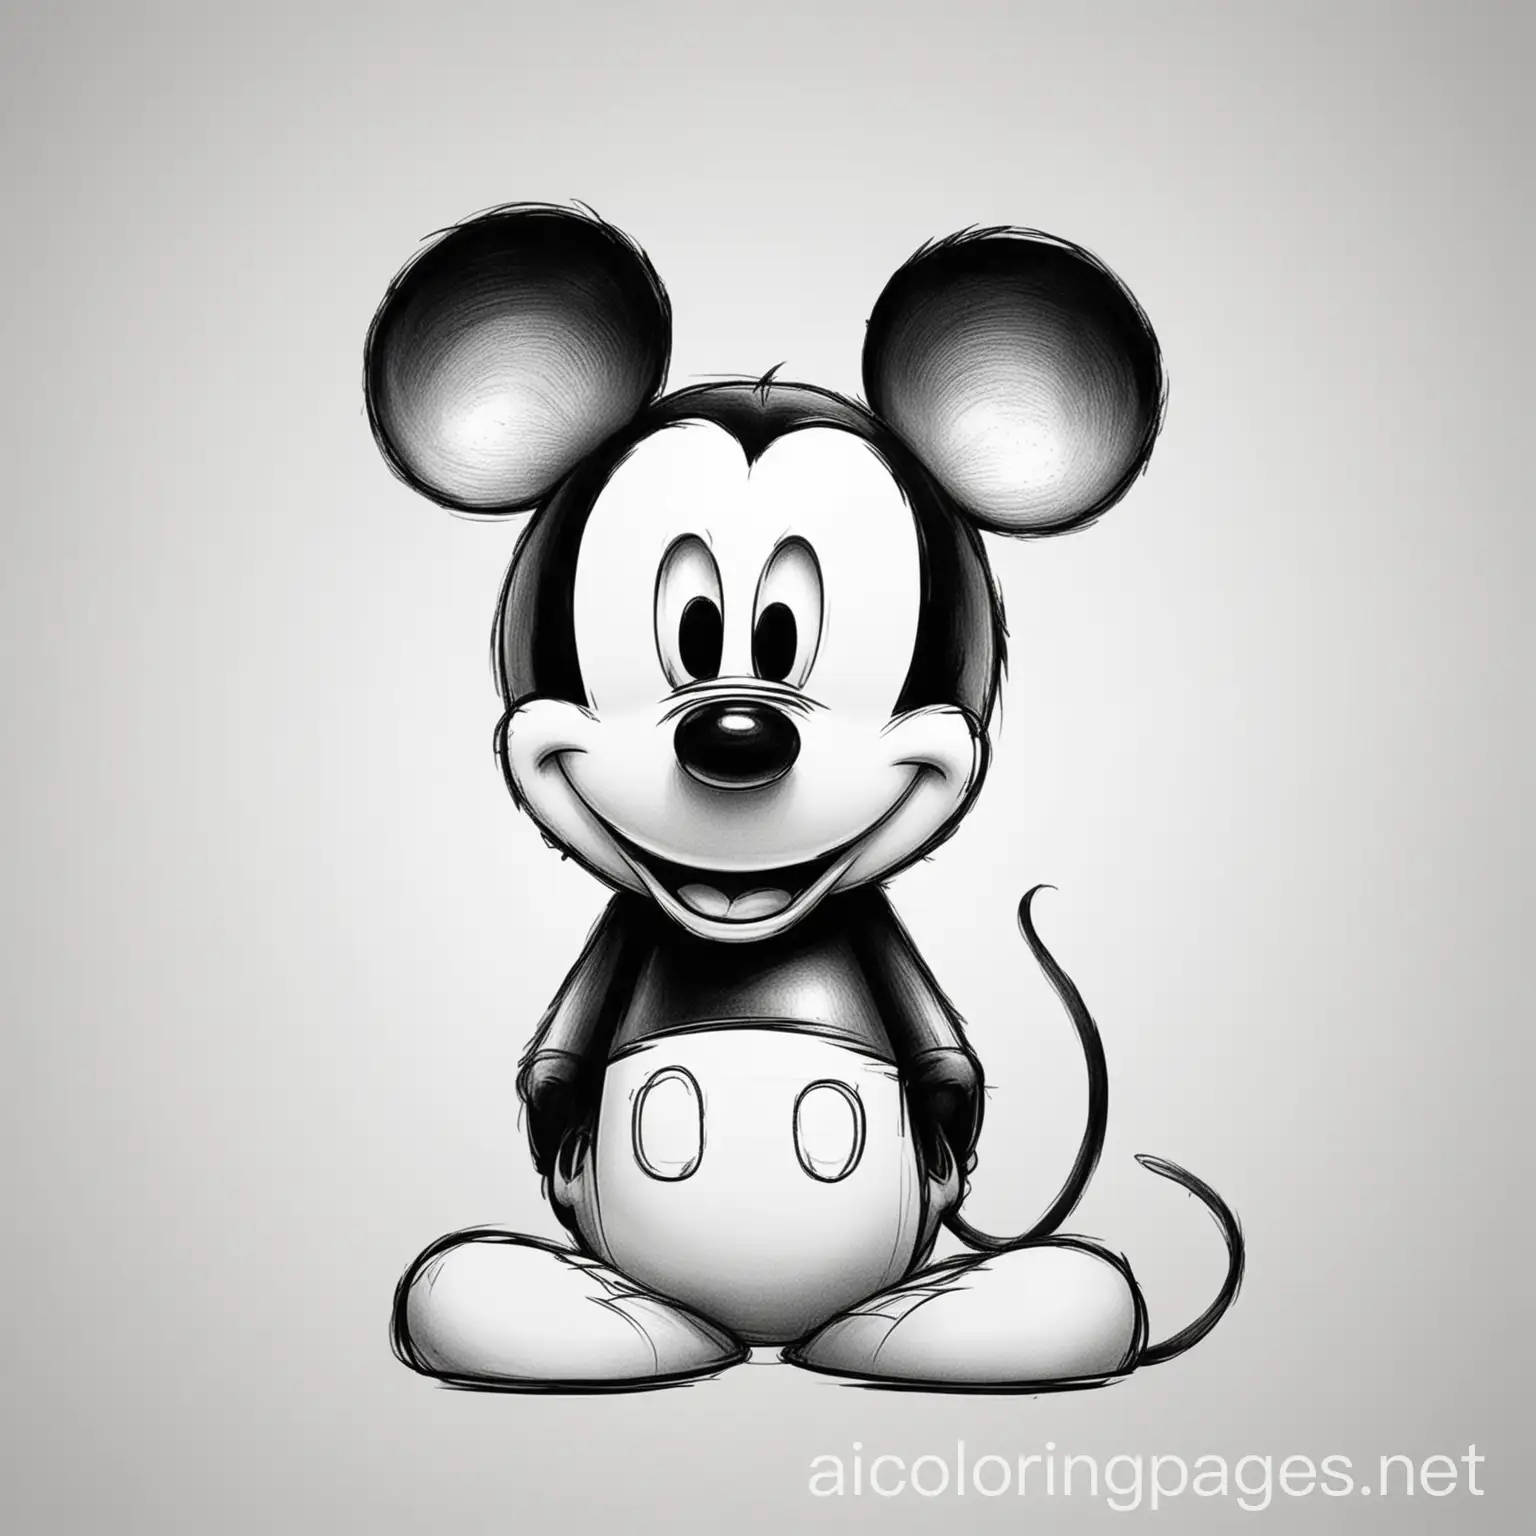 mickey mouse, Coloring Page, black and white, line art, white background, Simplicity, Ample White Space